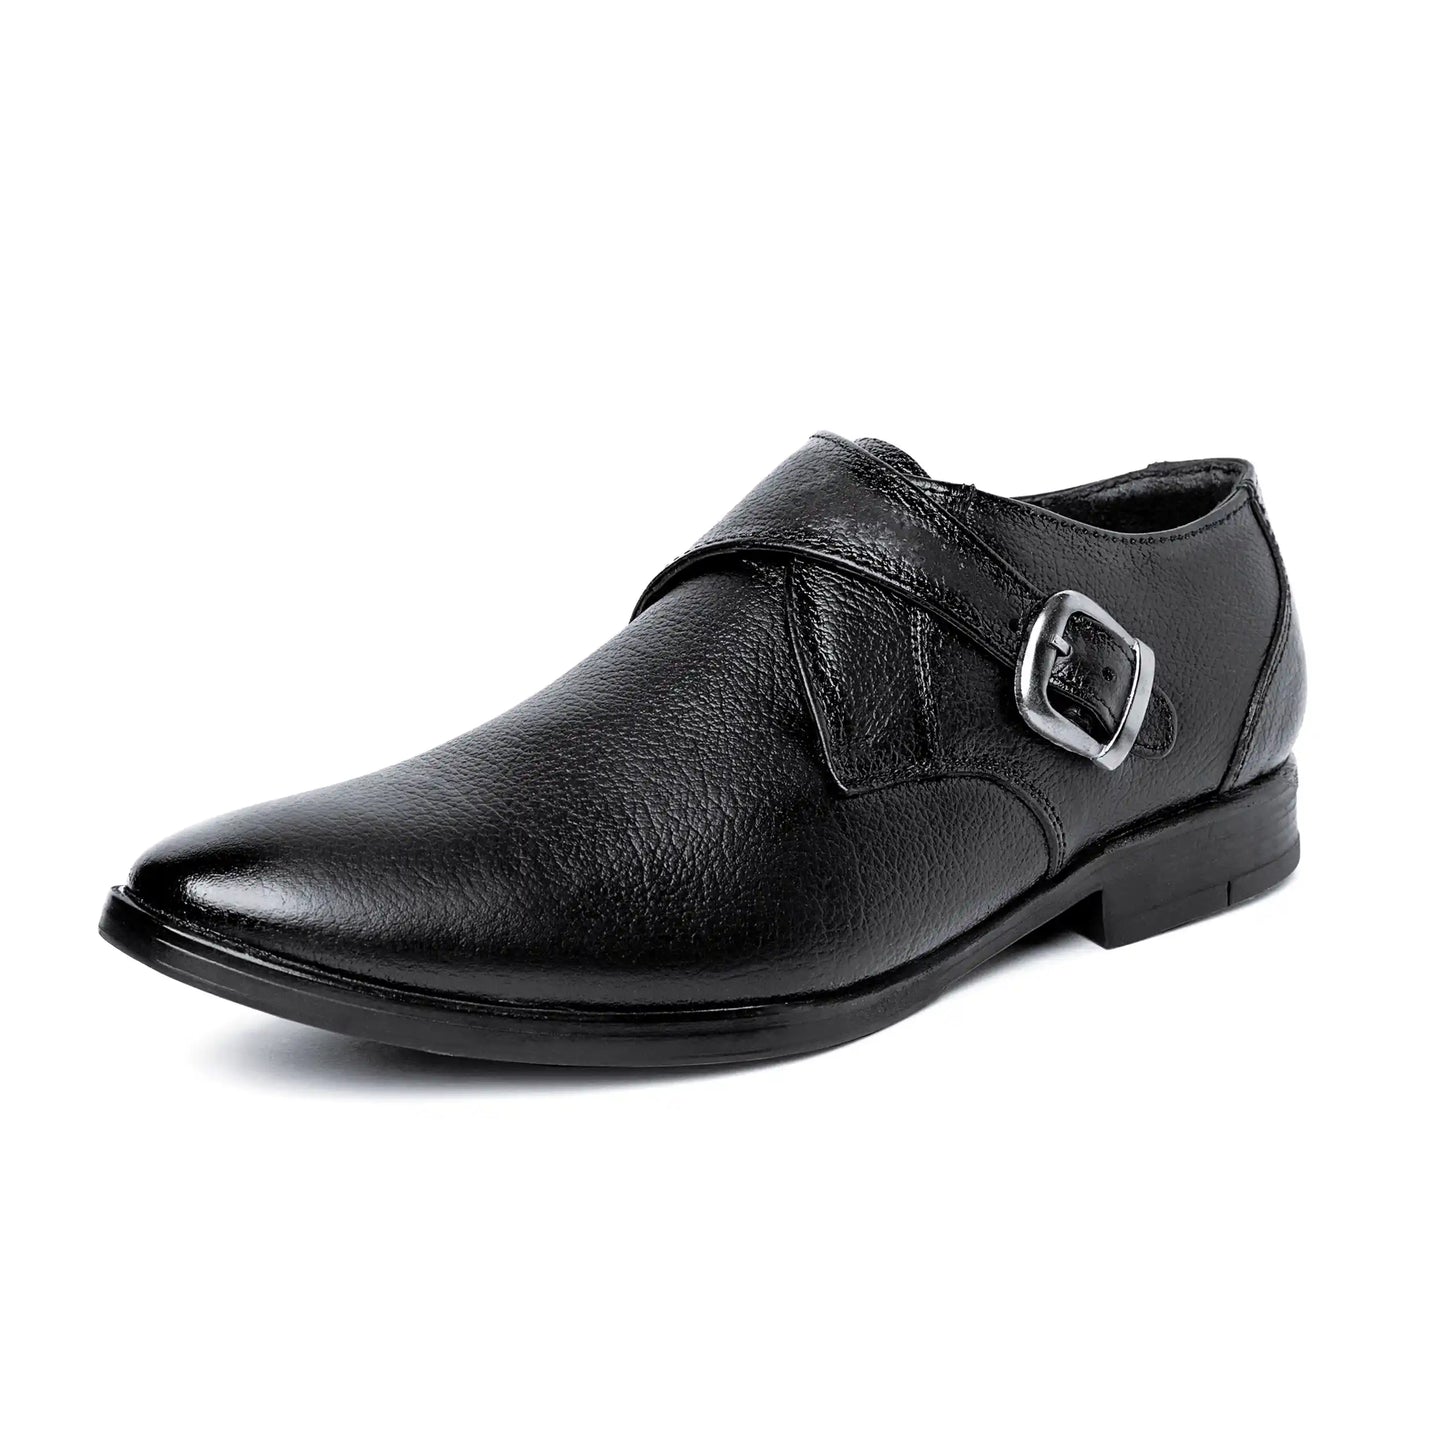 Genuine Leather Monk Strap Shoes for Men